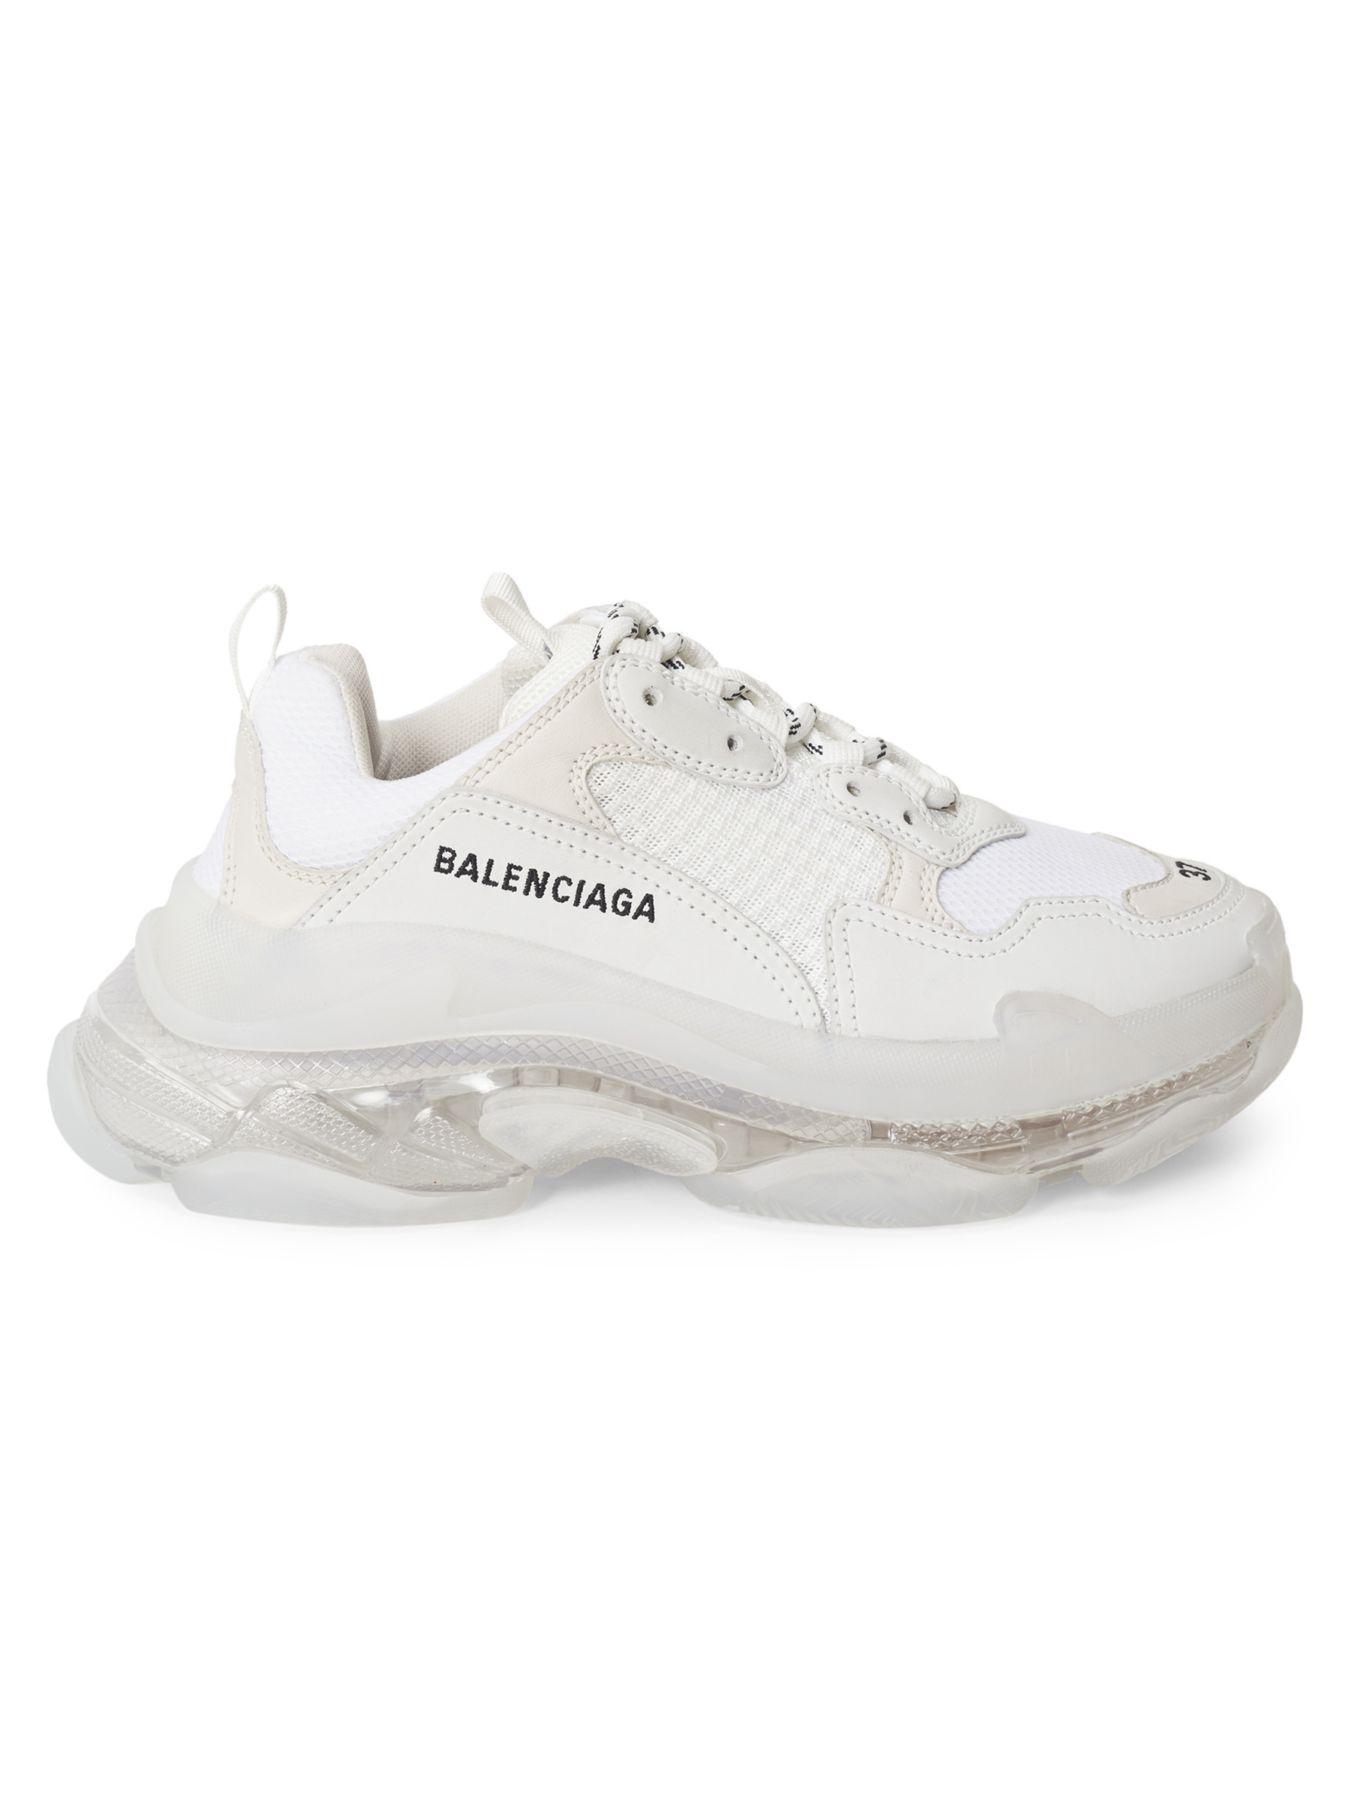 Balenciaga Synthetic Triple S Sneakers in White - Lyst